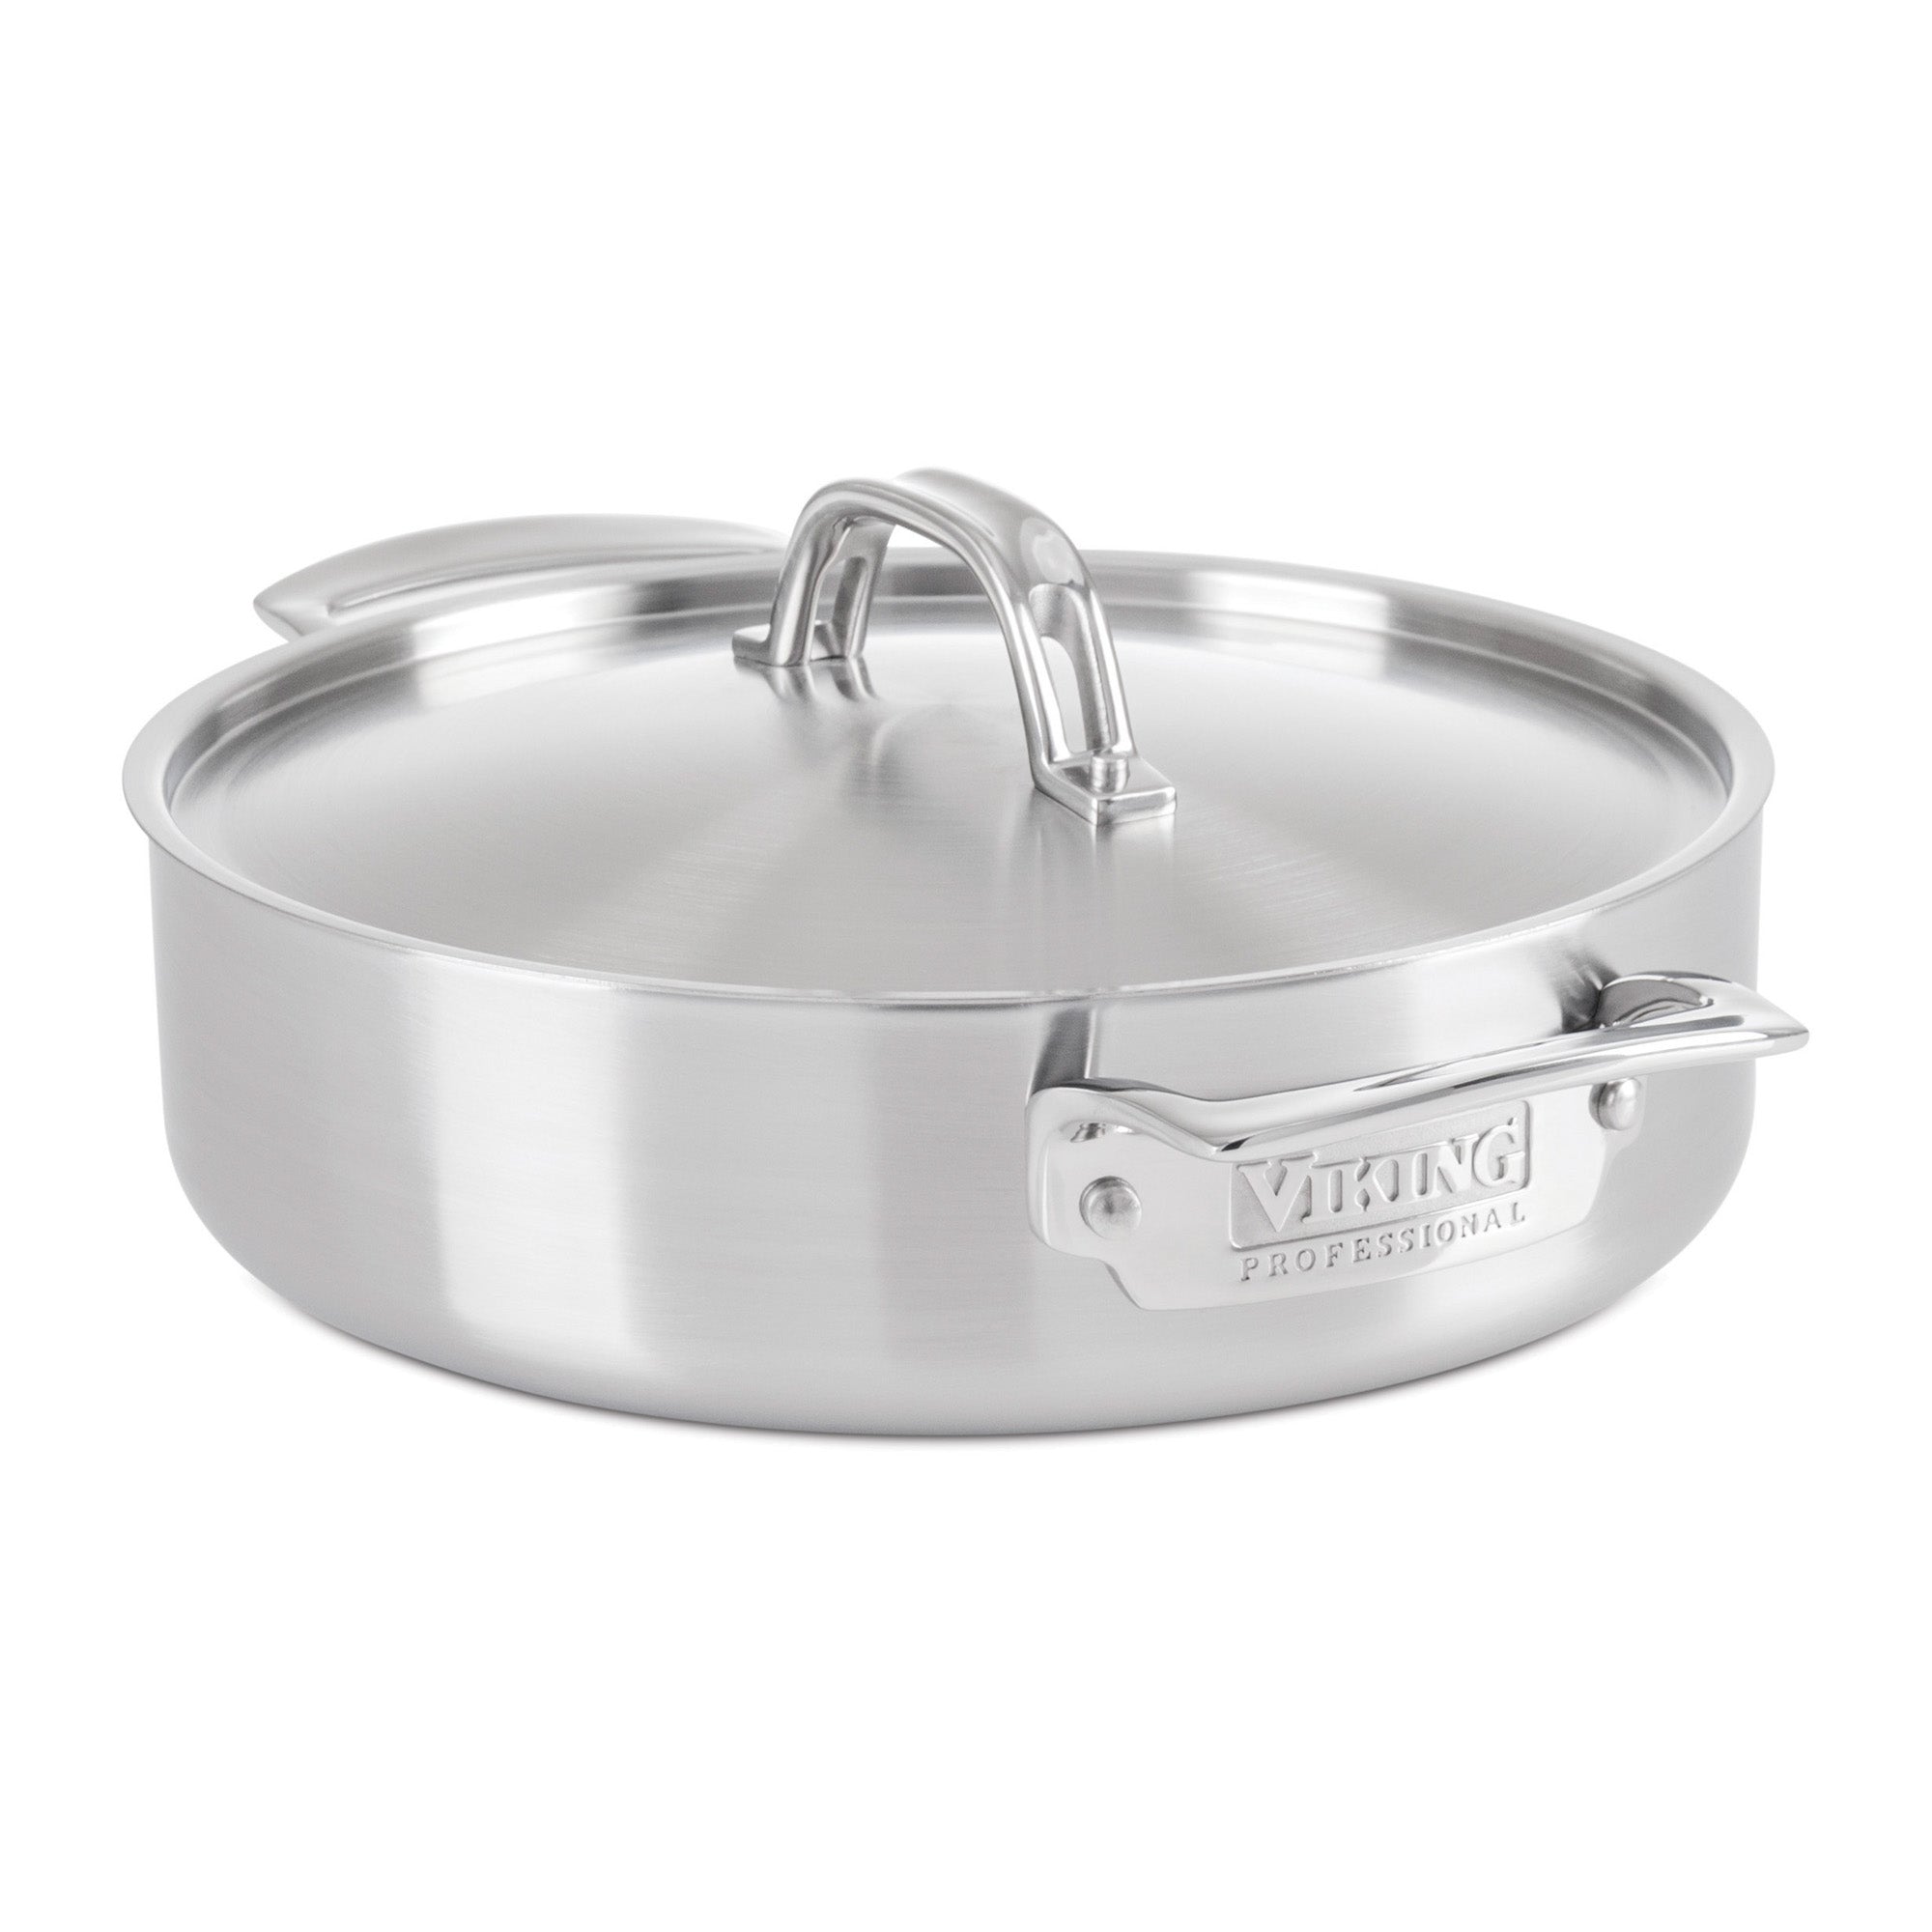 Viking Professional 5-Ply Stainless Steel 3.4-Quart Casserole Pan